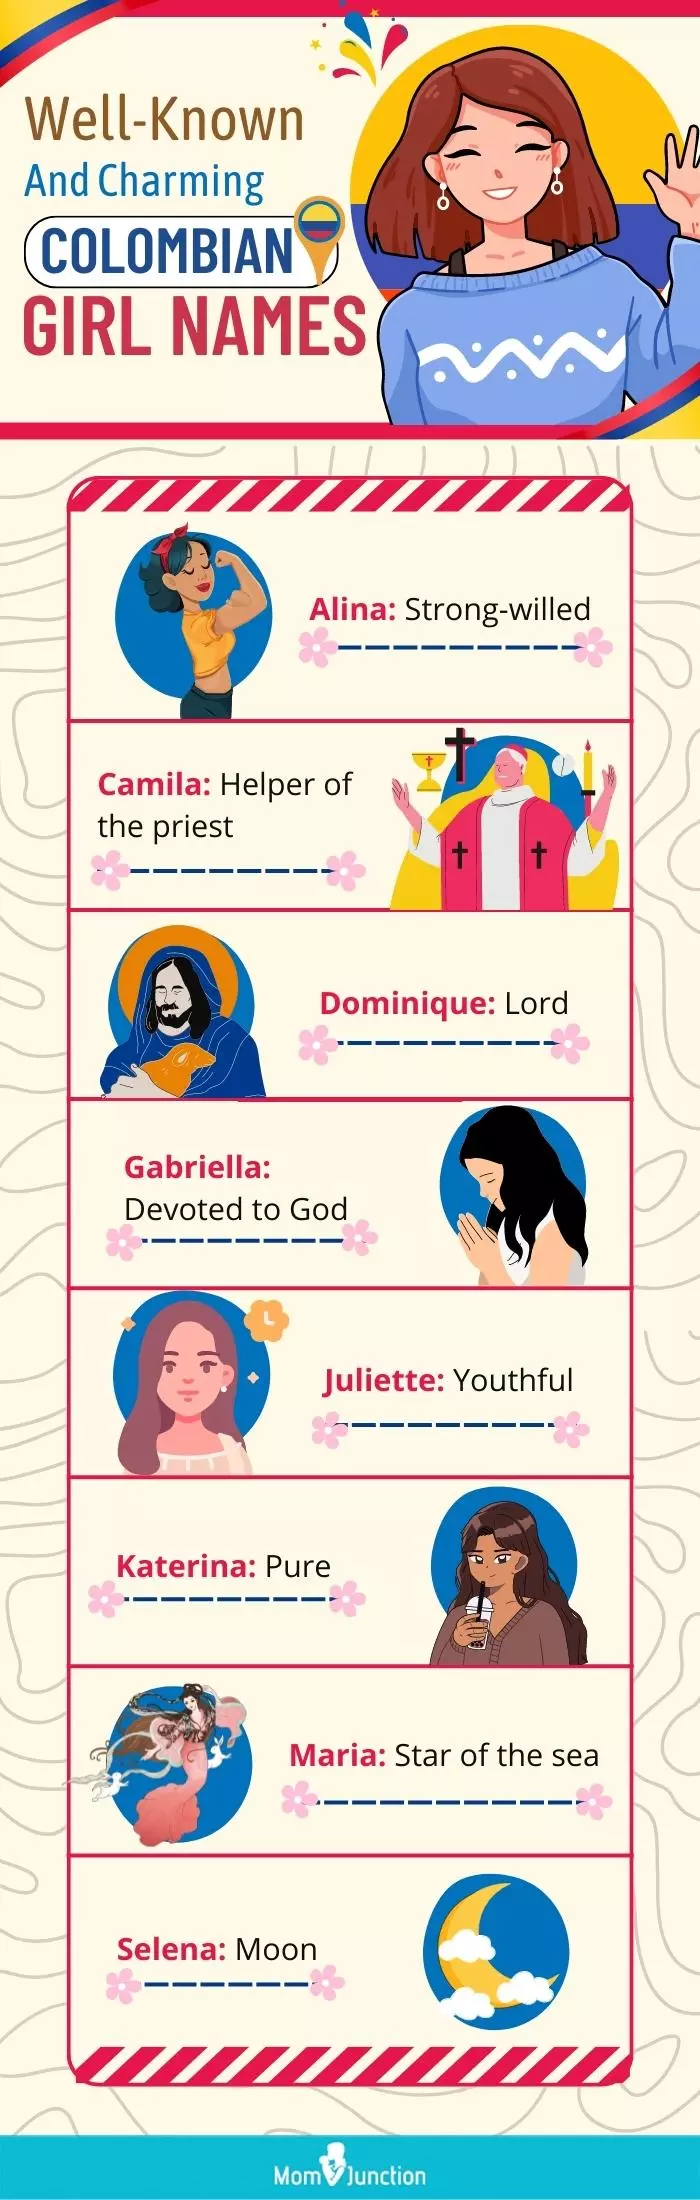 colombian girl names (infographic)